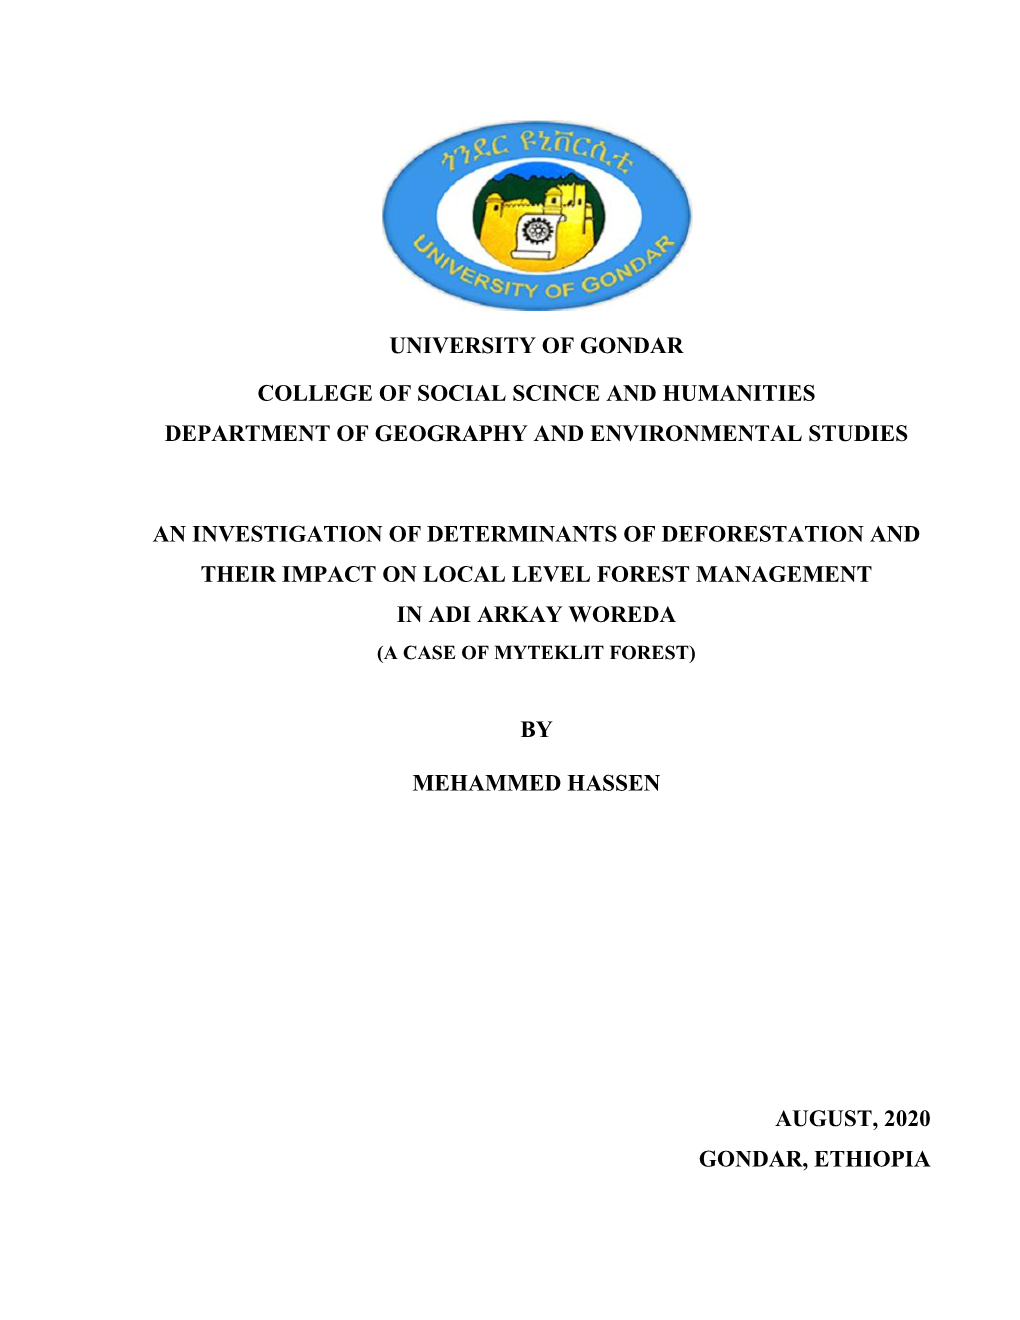 University of Gondar College of Social Scince And